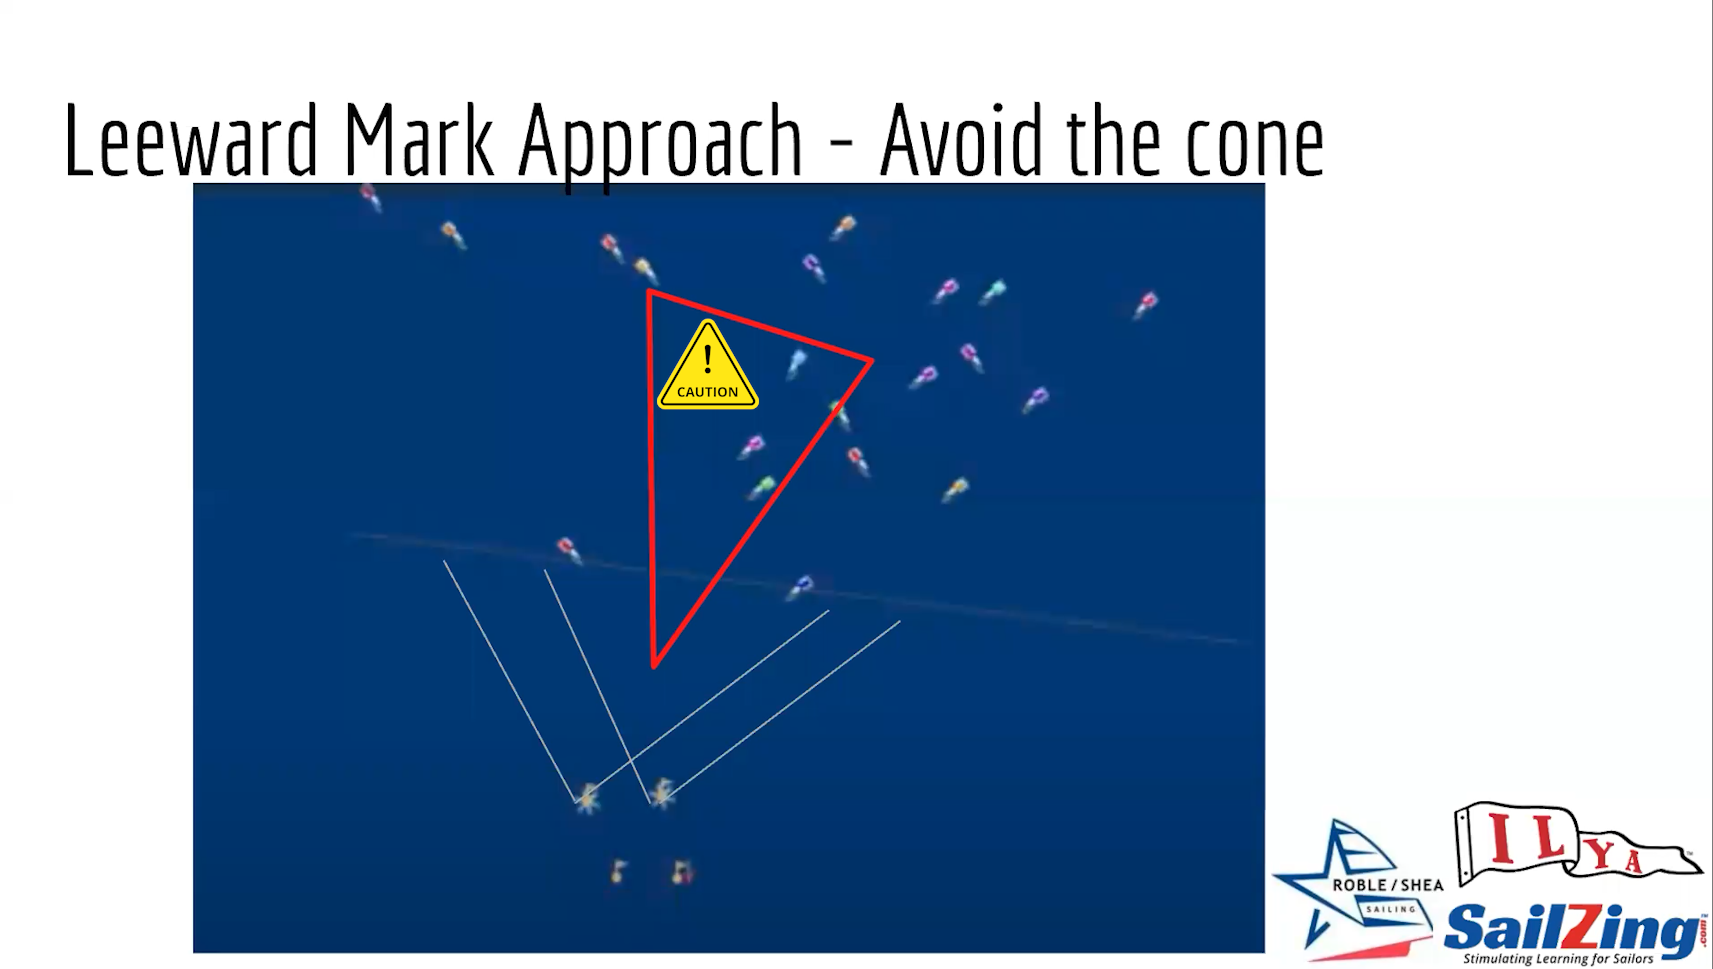 Avoid the Cone downwind